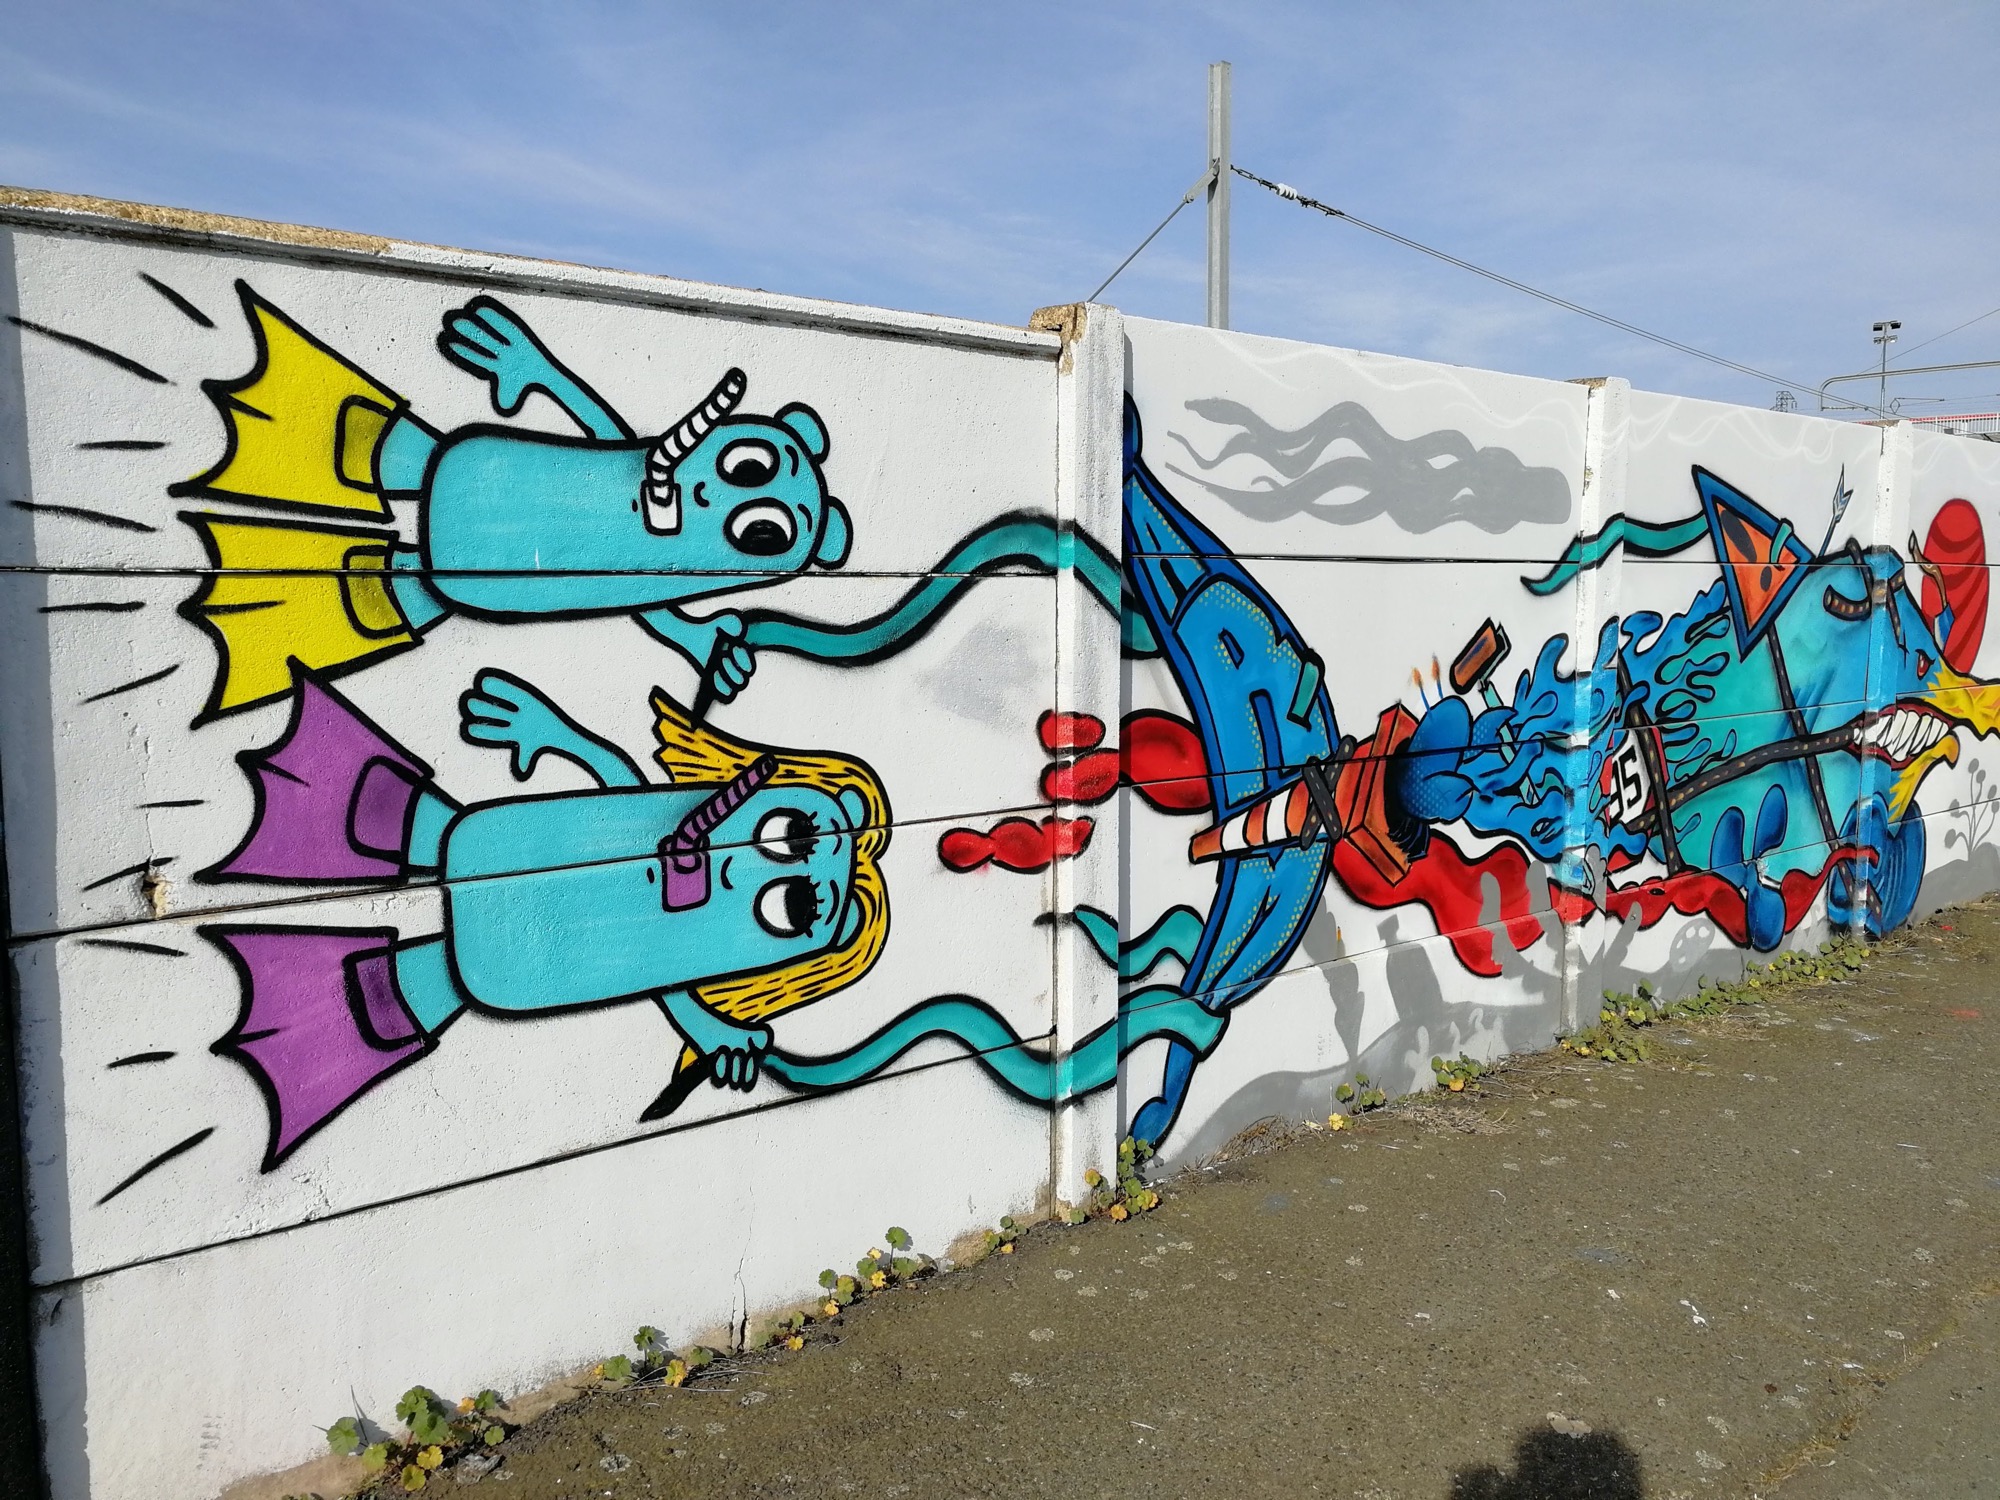 Graffiti 1331  by the artist Les Oides captured by Rabot in Saint-Nazaire France